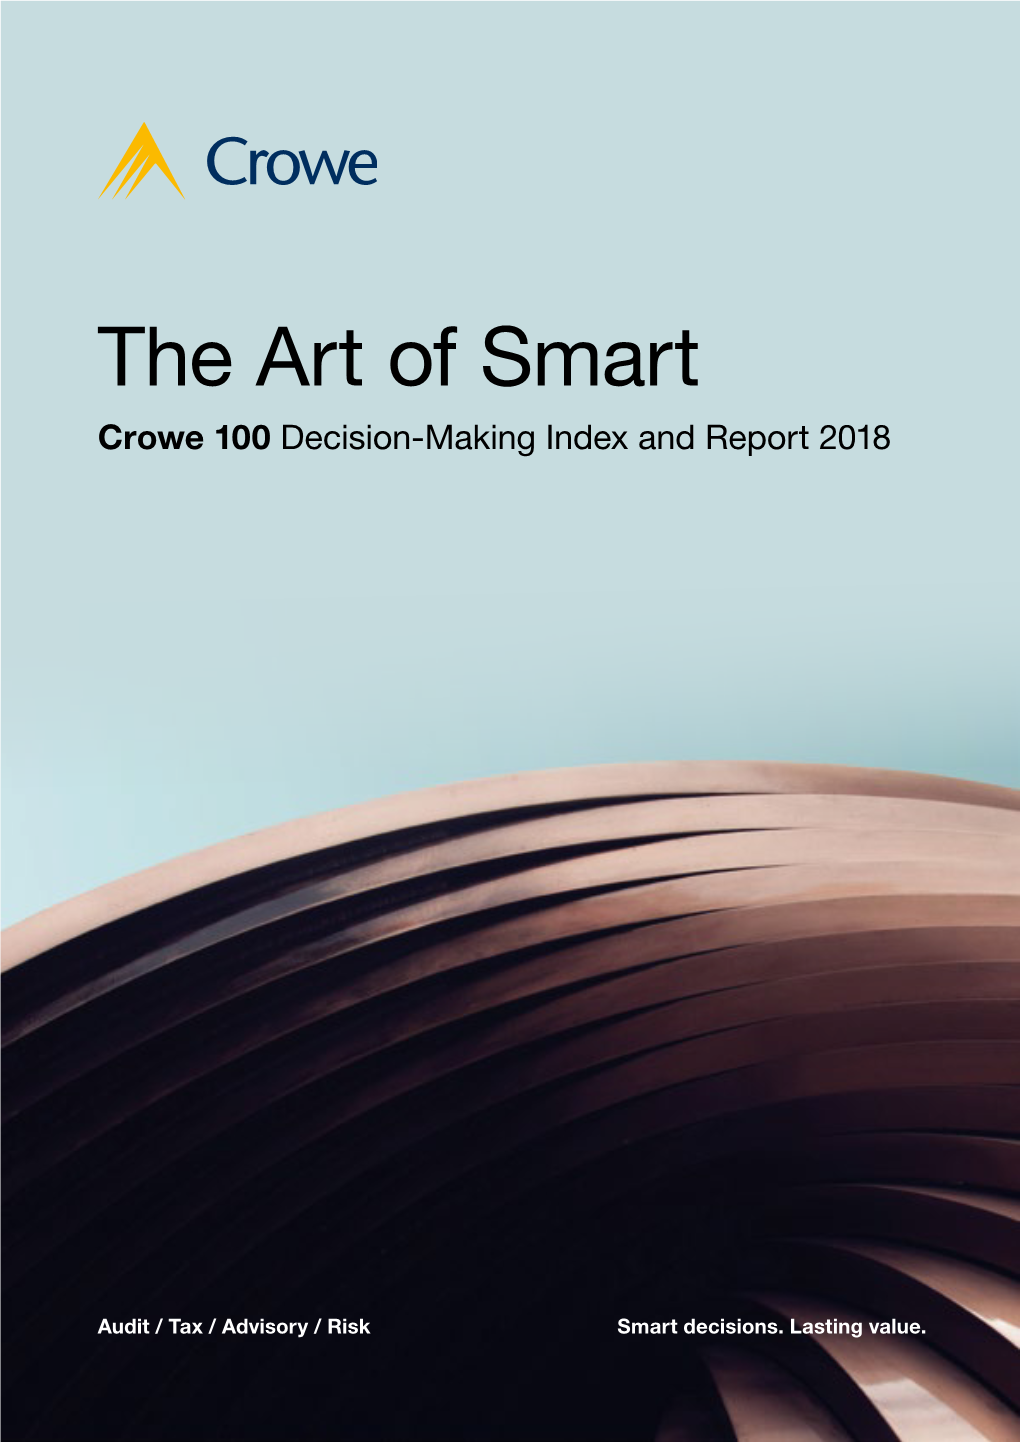 The Art of Smart Crowe 100 Decision-Making Index and Report 2018